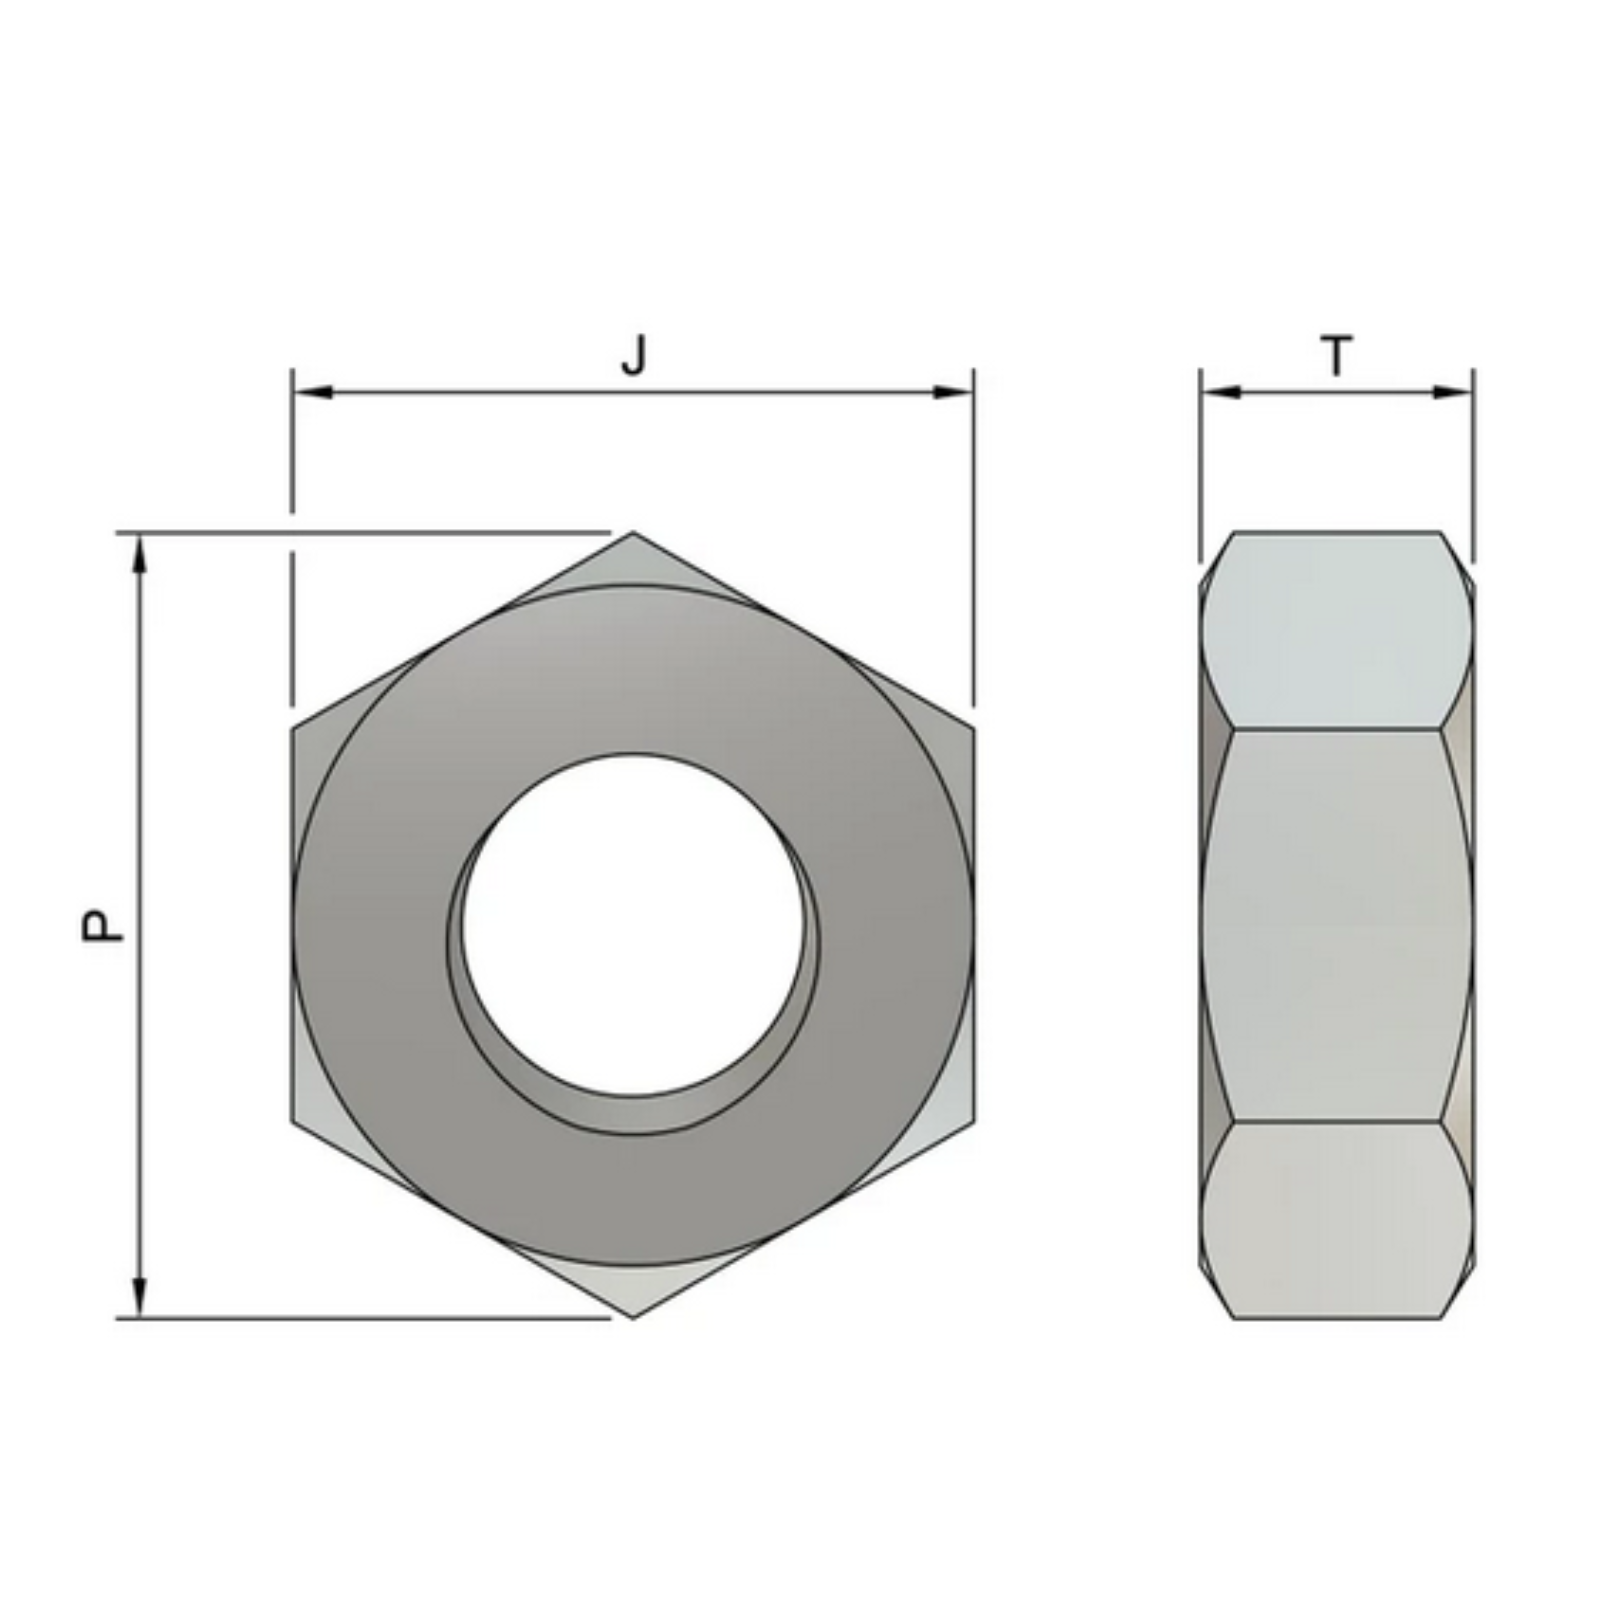 M2.5 Hexagon Nuts (DIN 934) - Stainless Steel (A4)